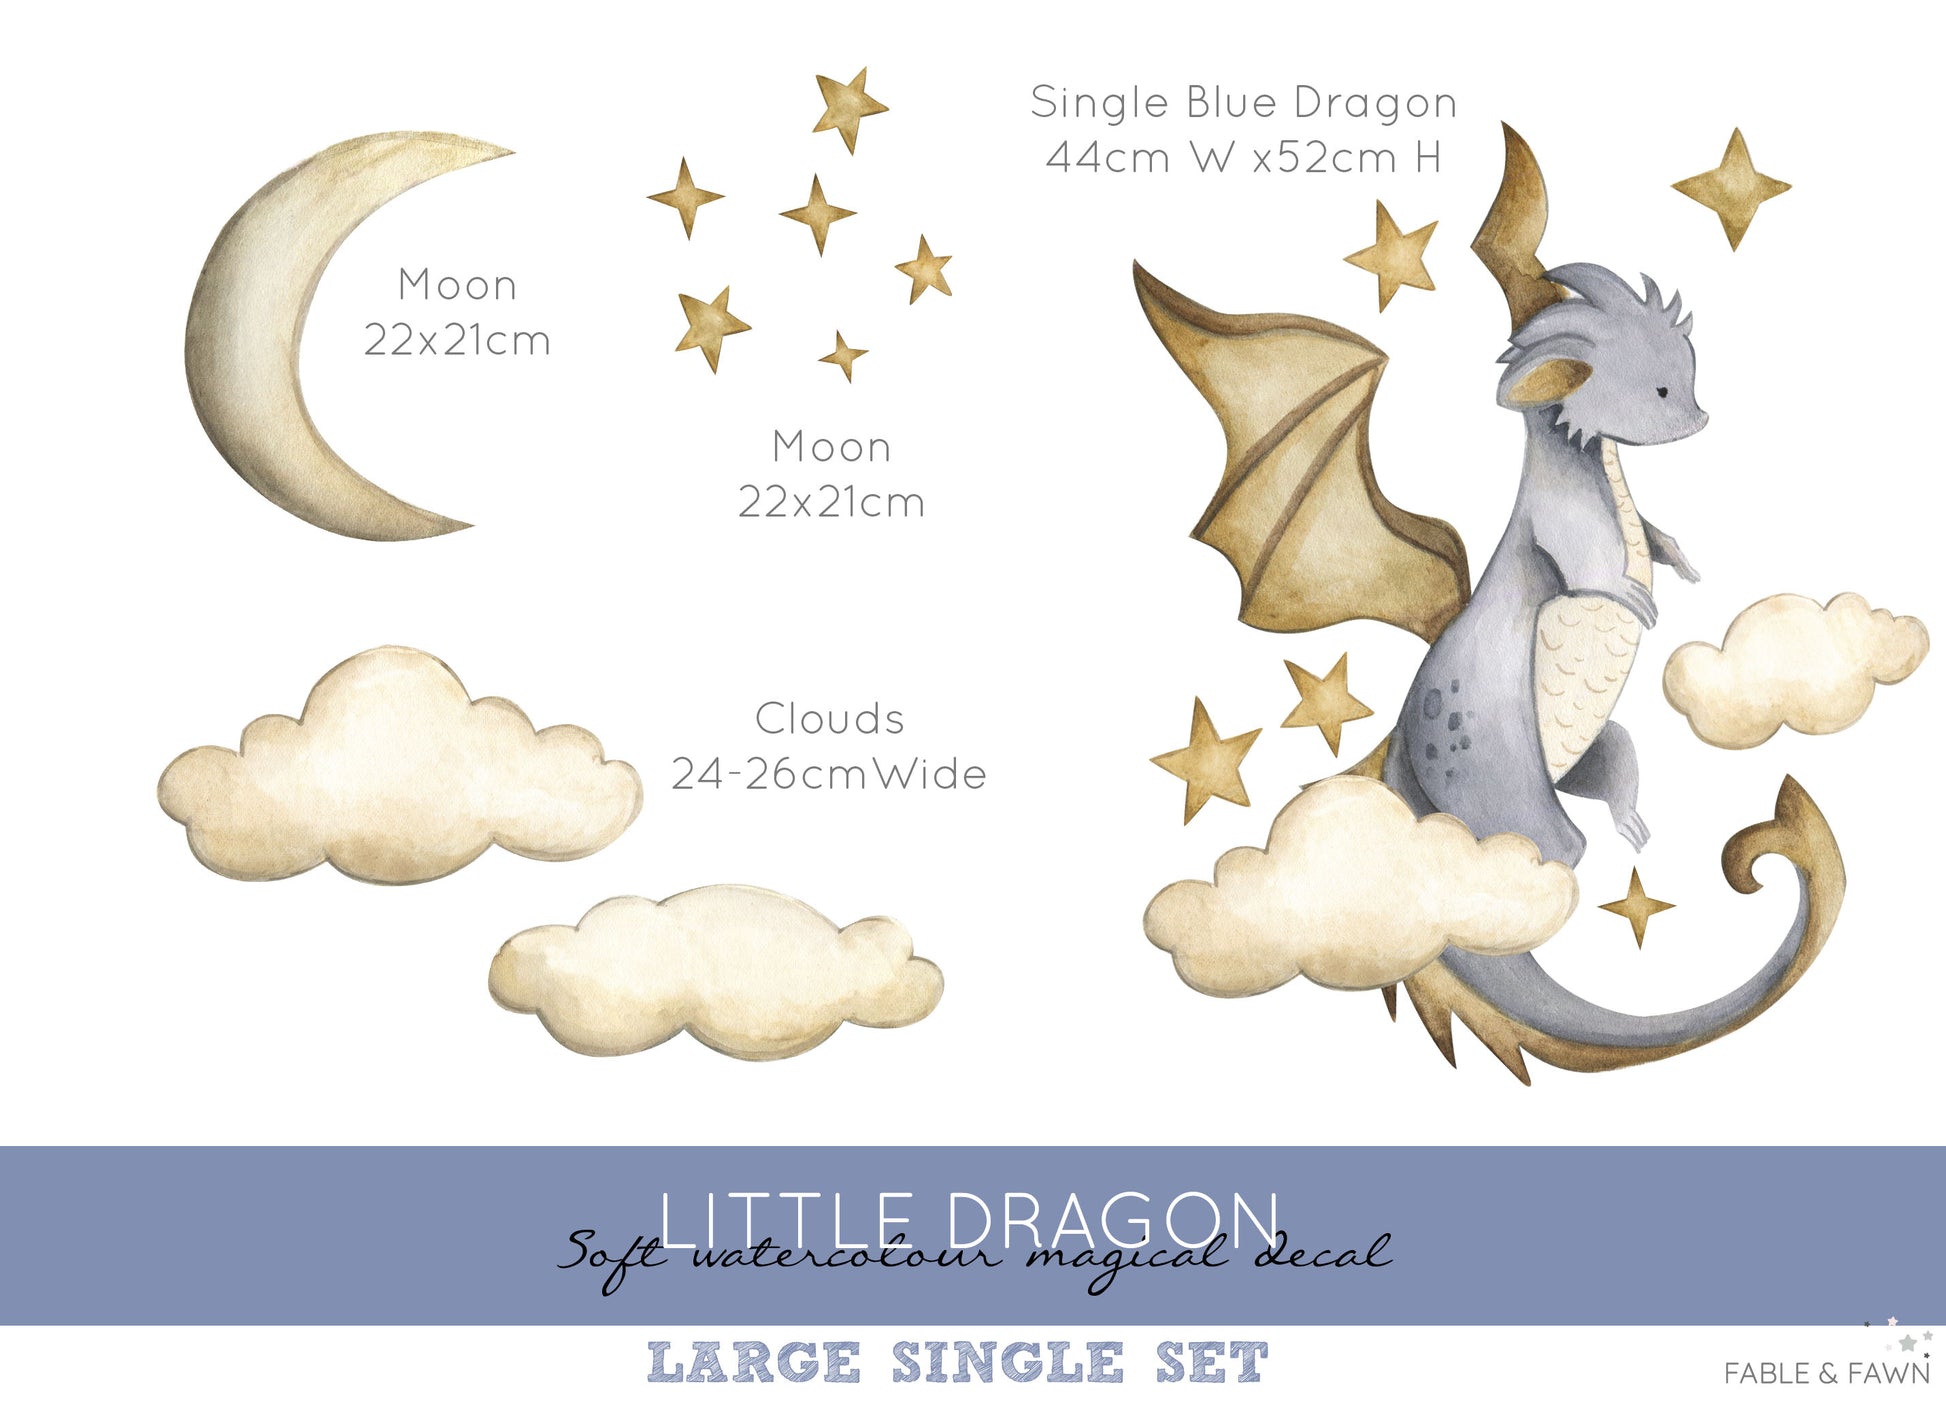 Baby Dragon Nursery Wall Sticker - Wall Decals Australia - Fable and Fawn 